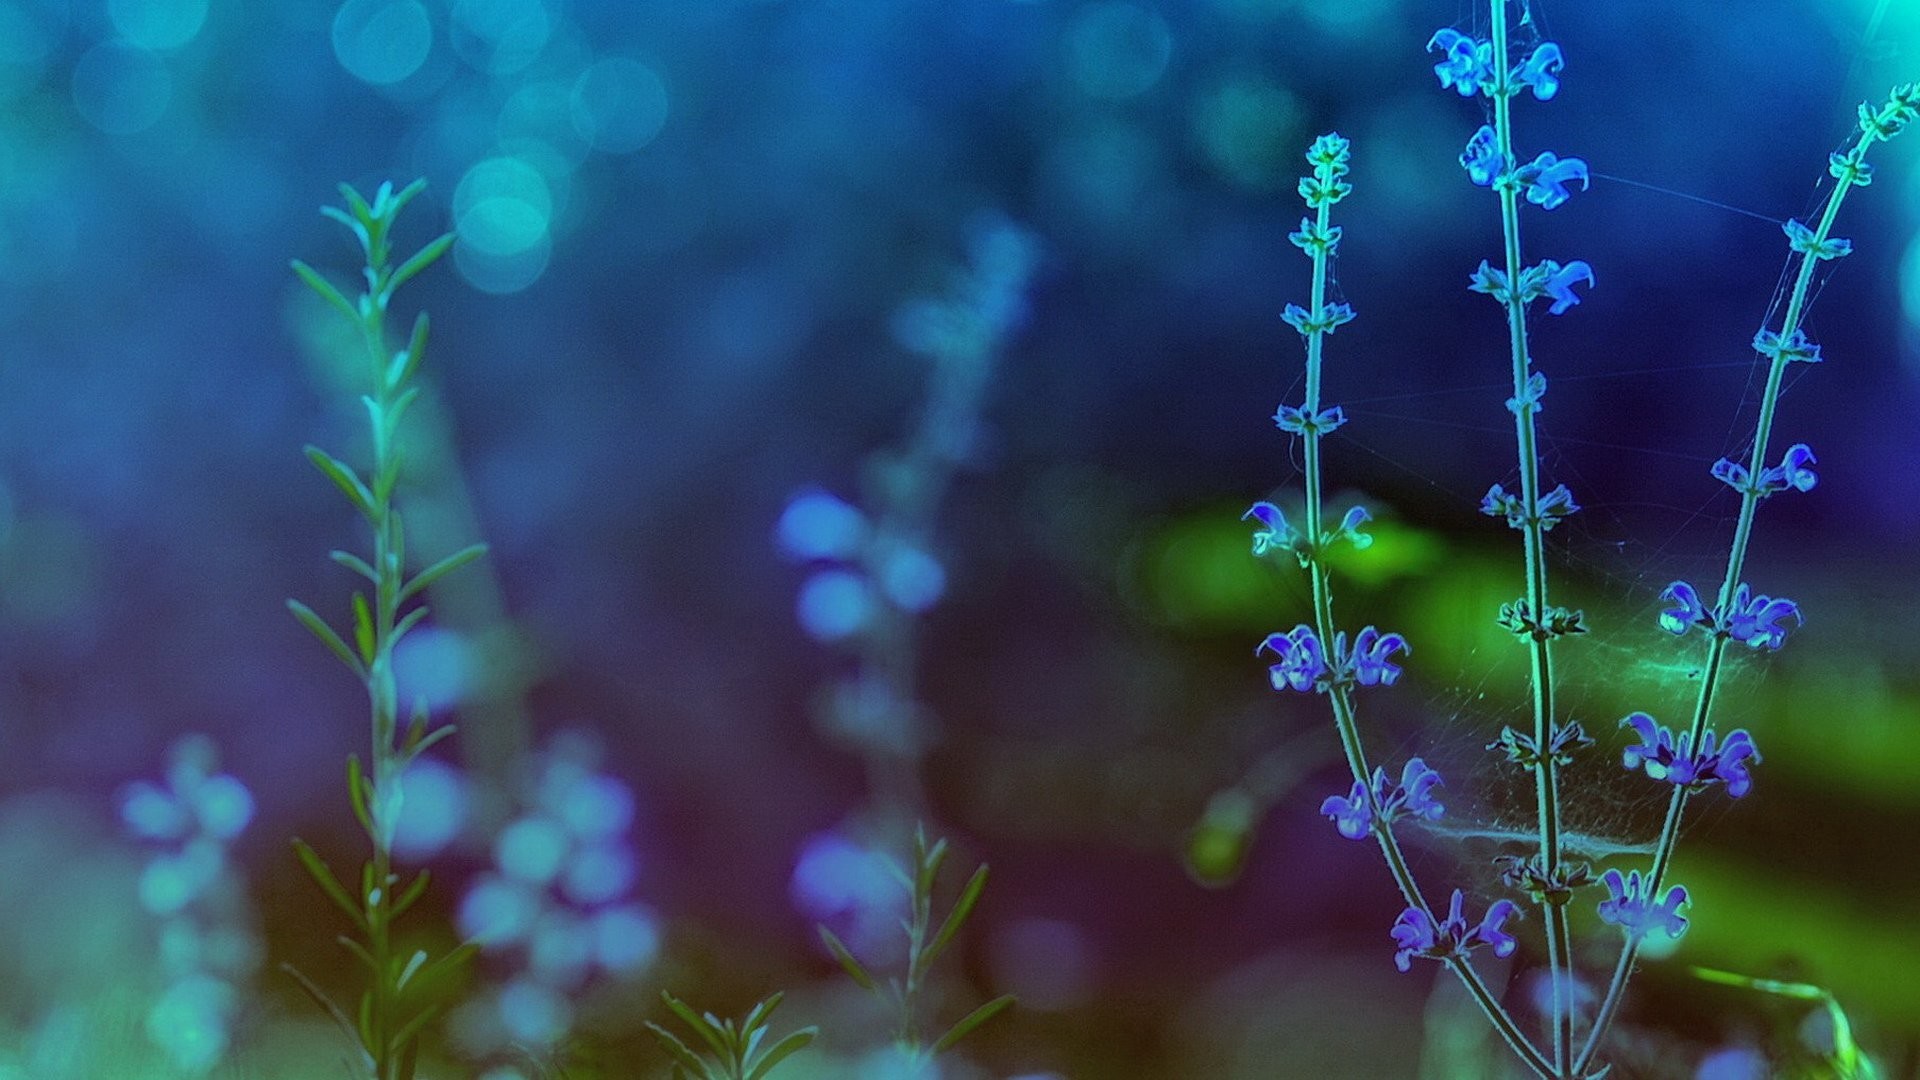 1920x1080  Wildflowers 811037. UPLOAD. TAGS: Themes Desktop Wildflowers  Backgrounds Spring